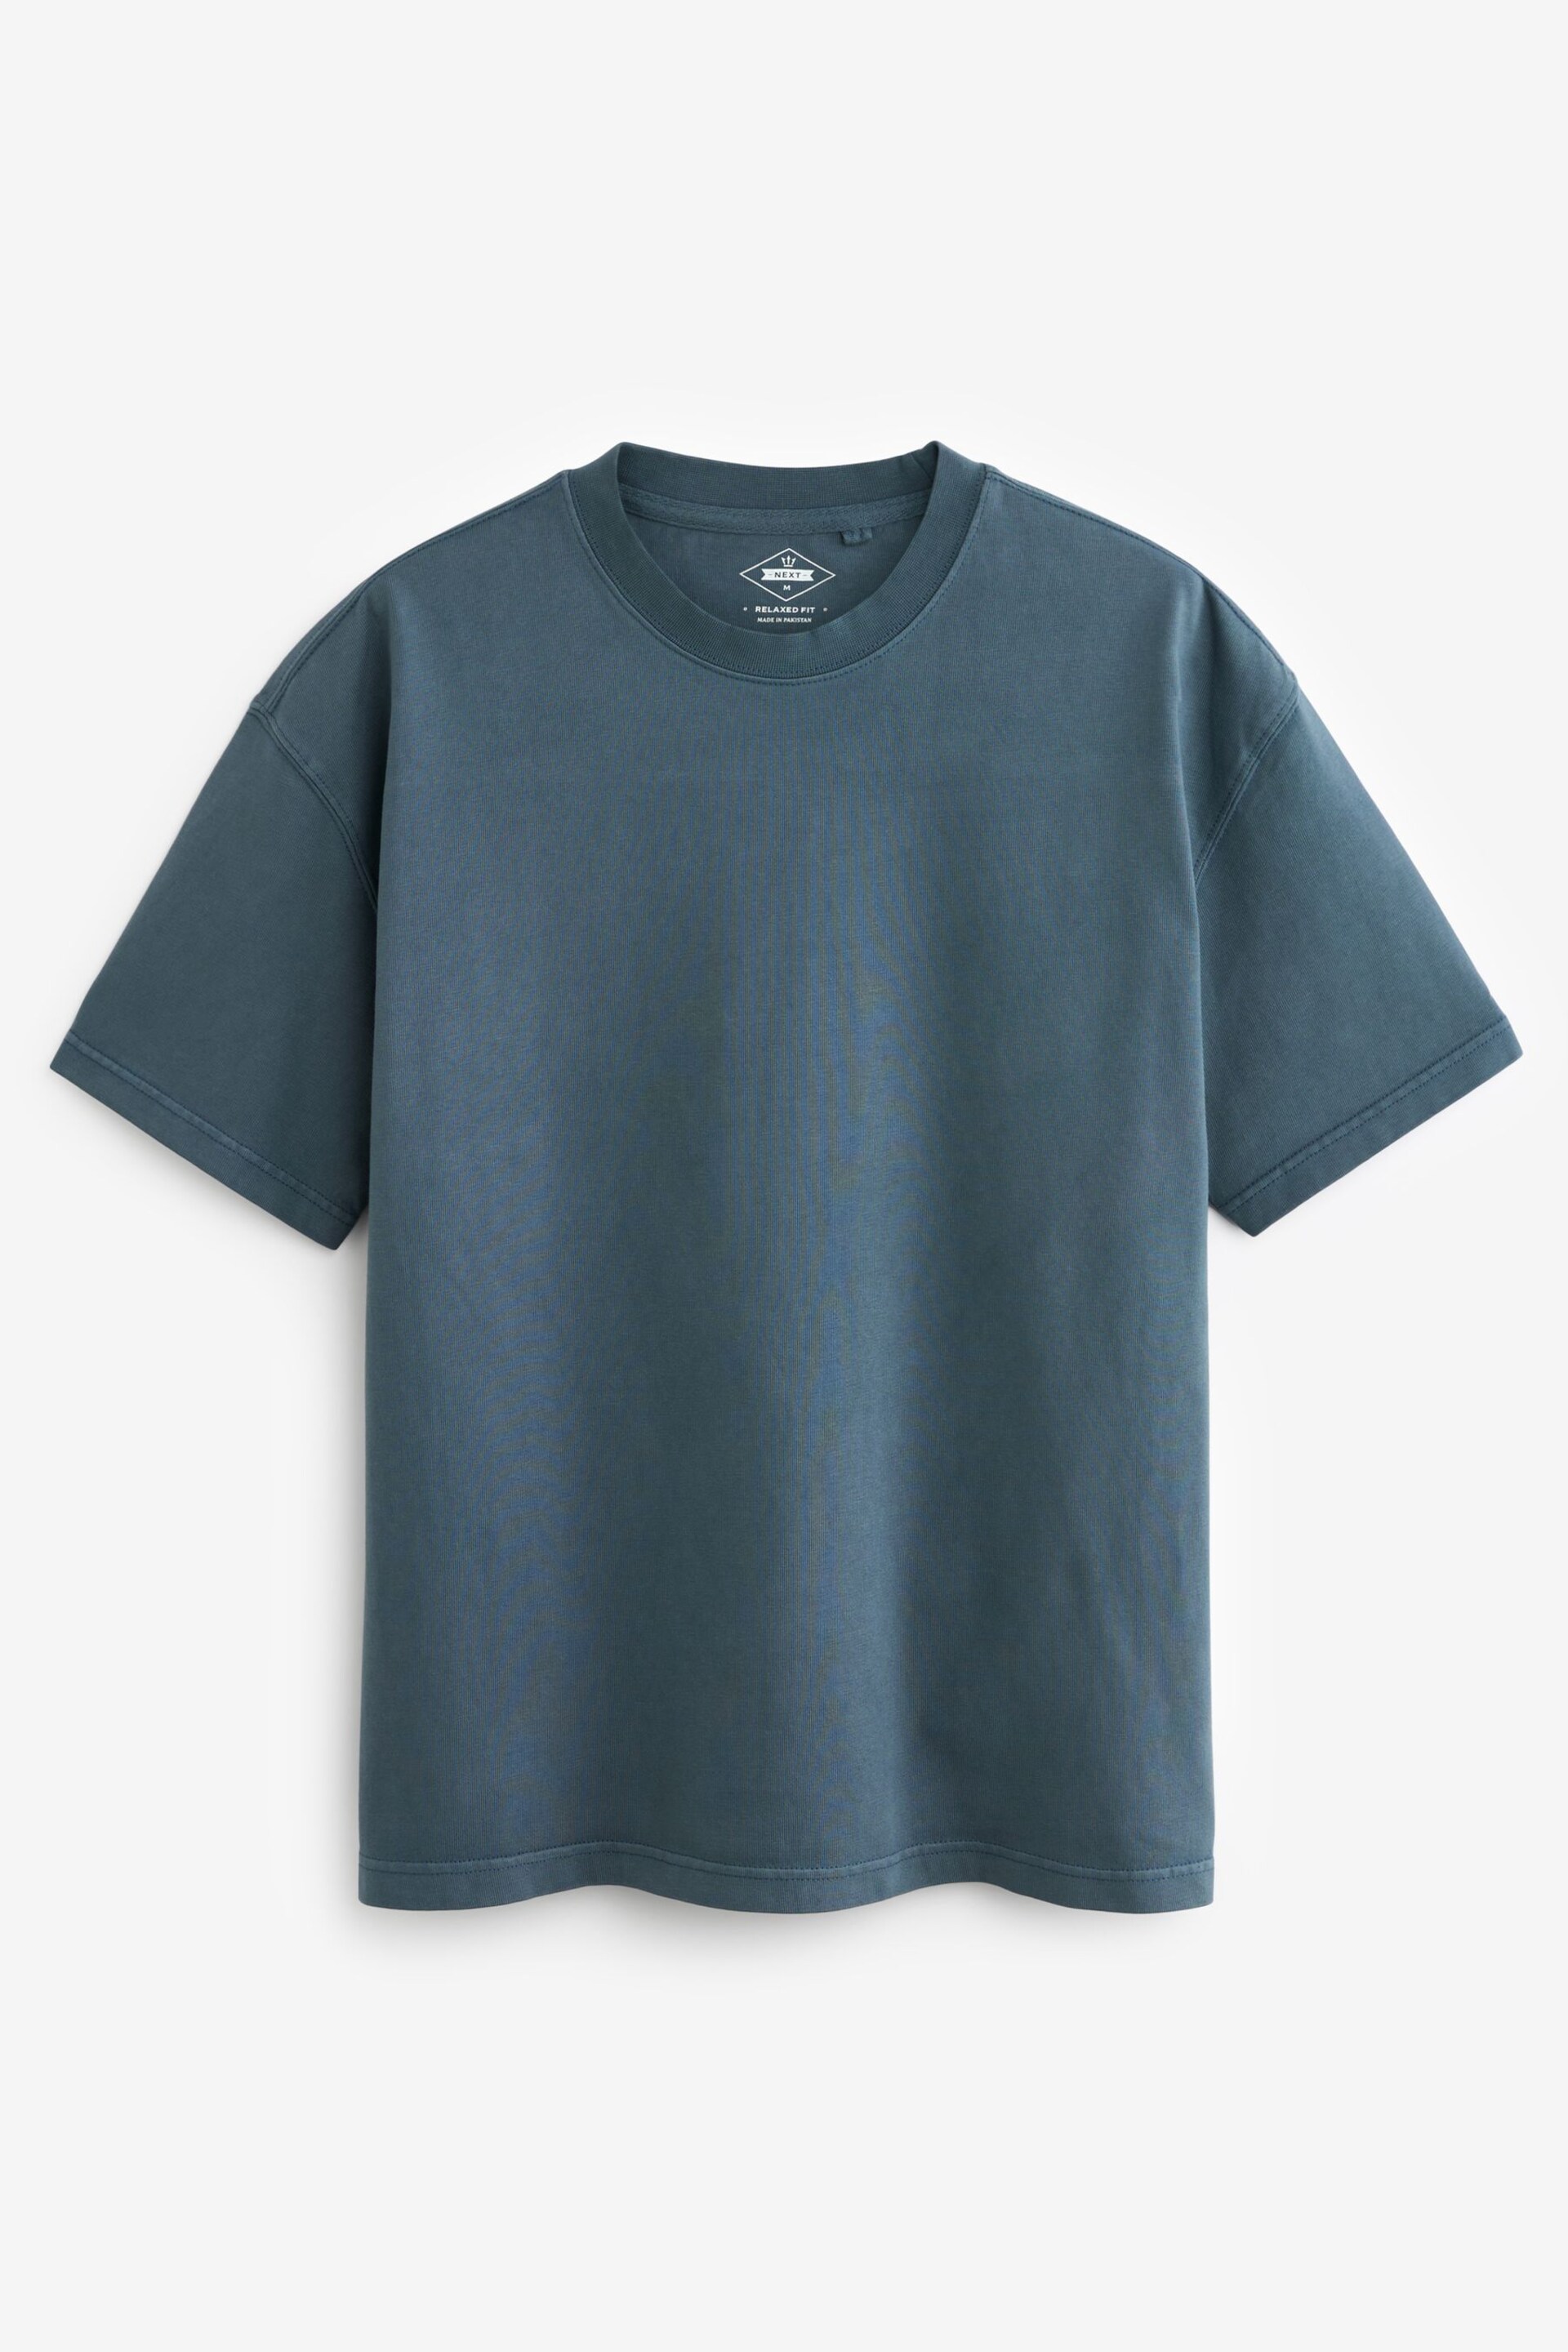 Navy Blue Garment Dye Relaxed Fit Heavyweight T-Shirt - Image 6 of 8